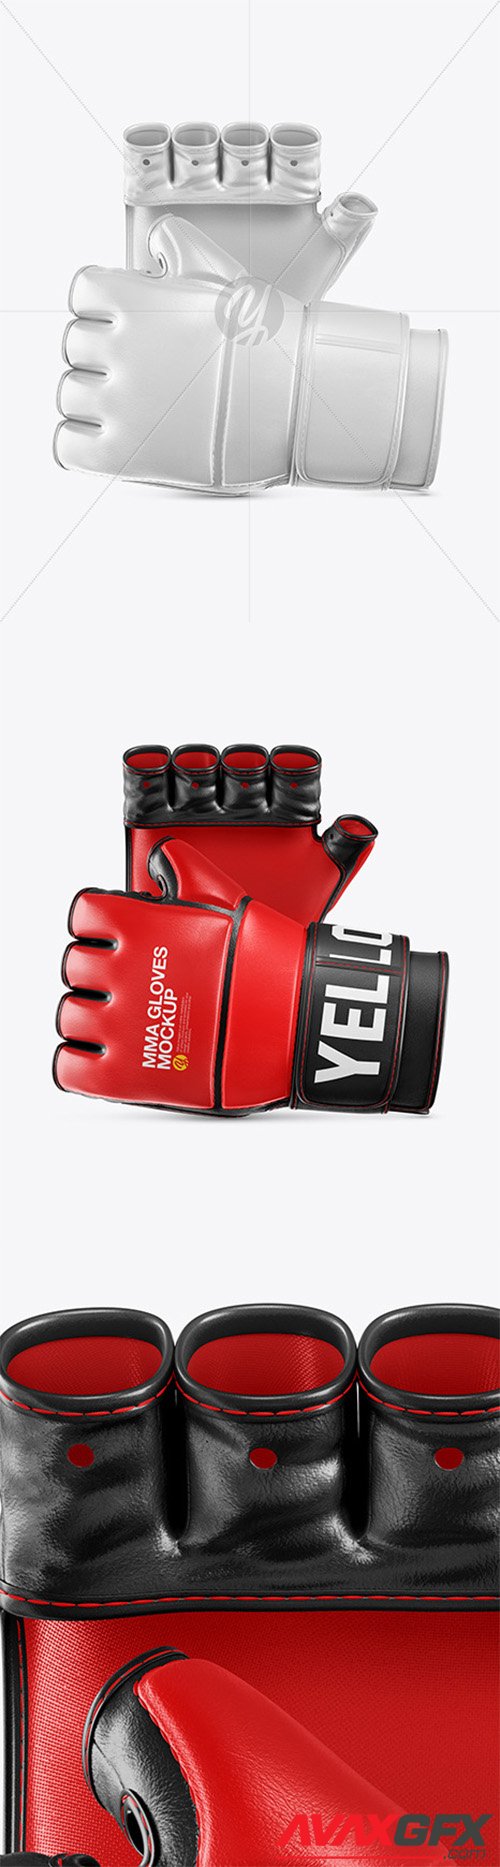 Download Boxing Gloves Mockup 21325 » AVAXGFX - All Downloads that ...